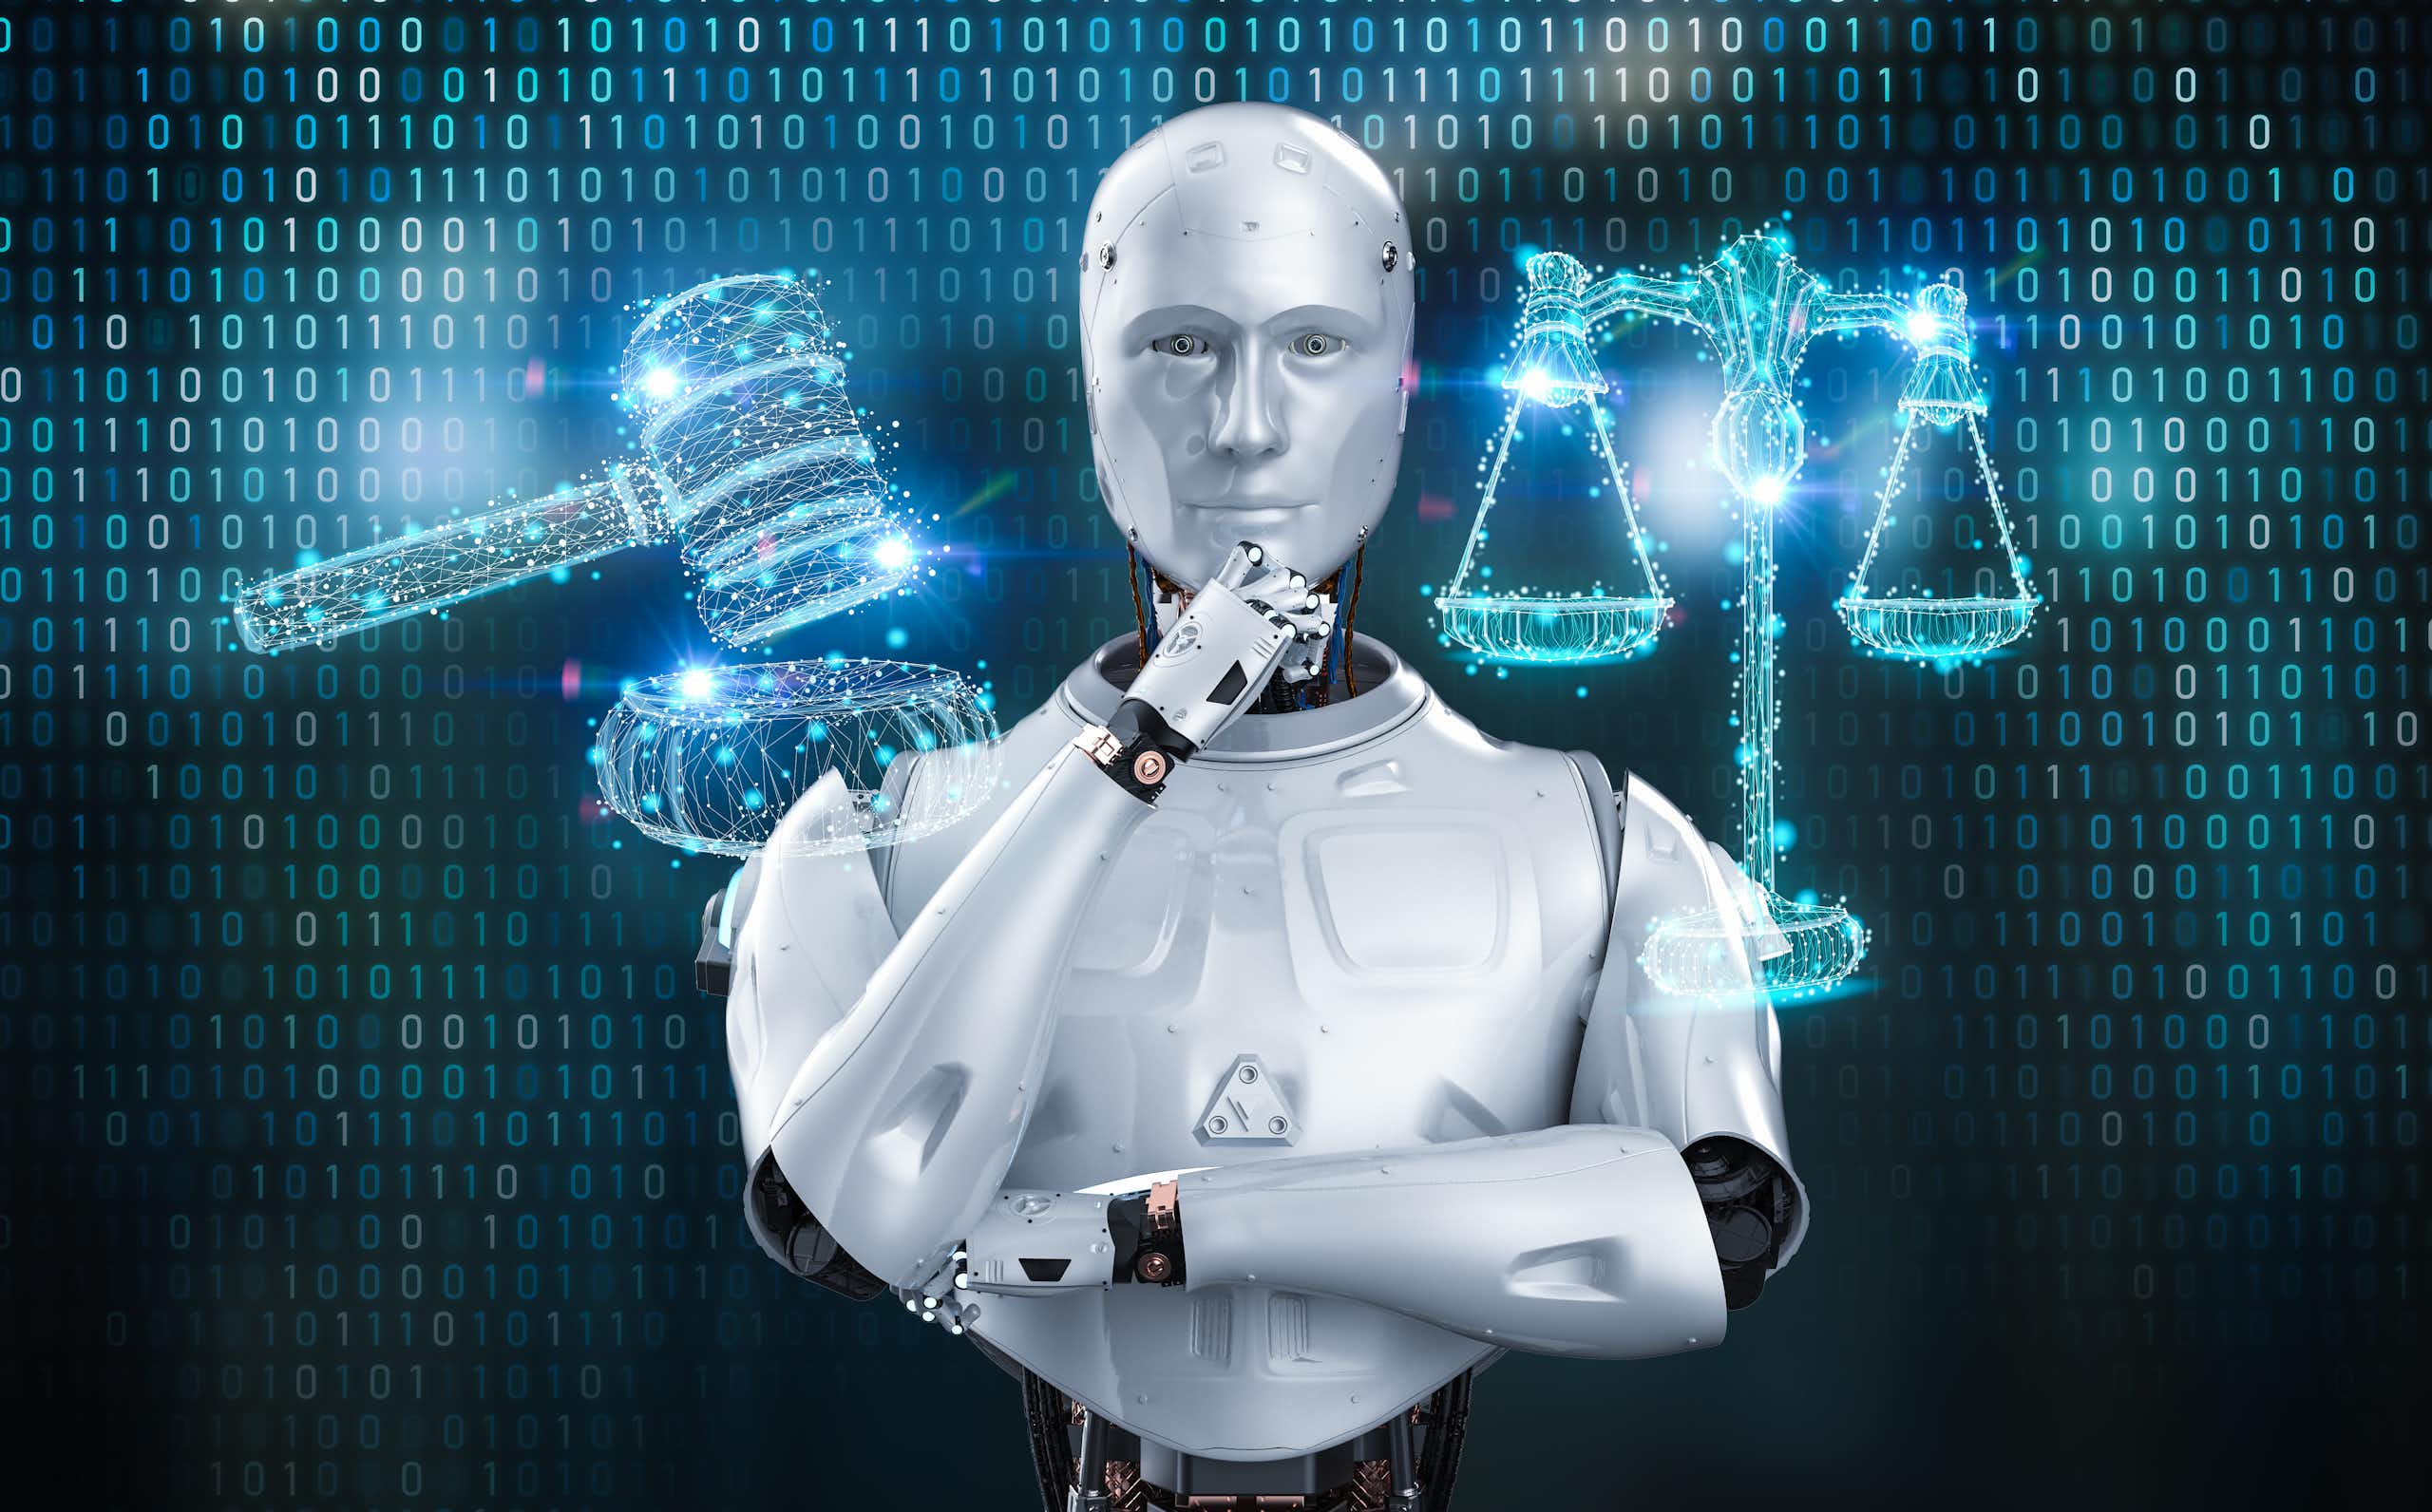 An AI robot has arms folded with a digital image of the scales of justice on one side and a judge's gavel on the other.